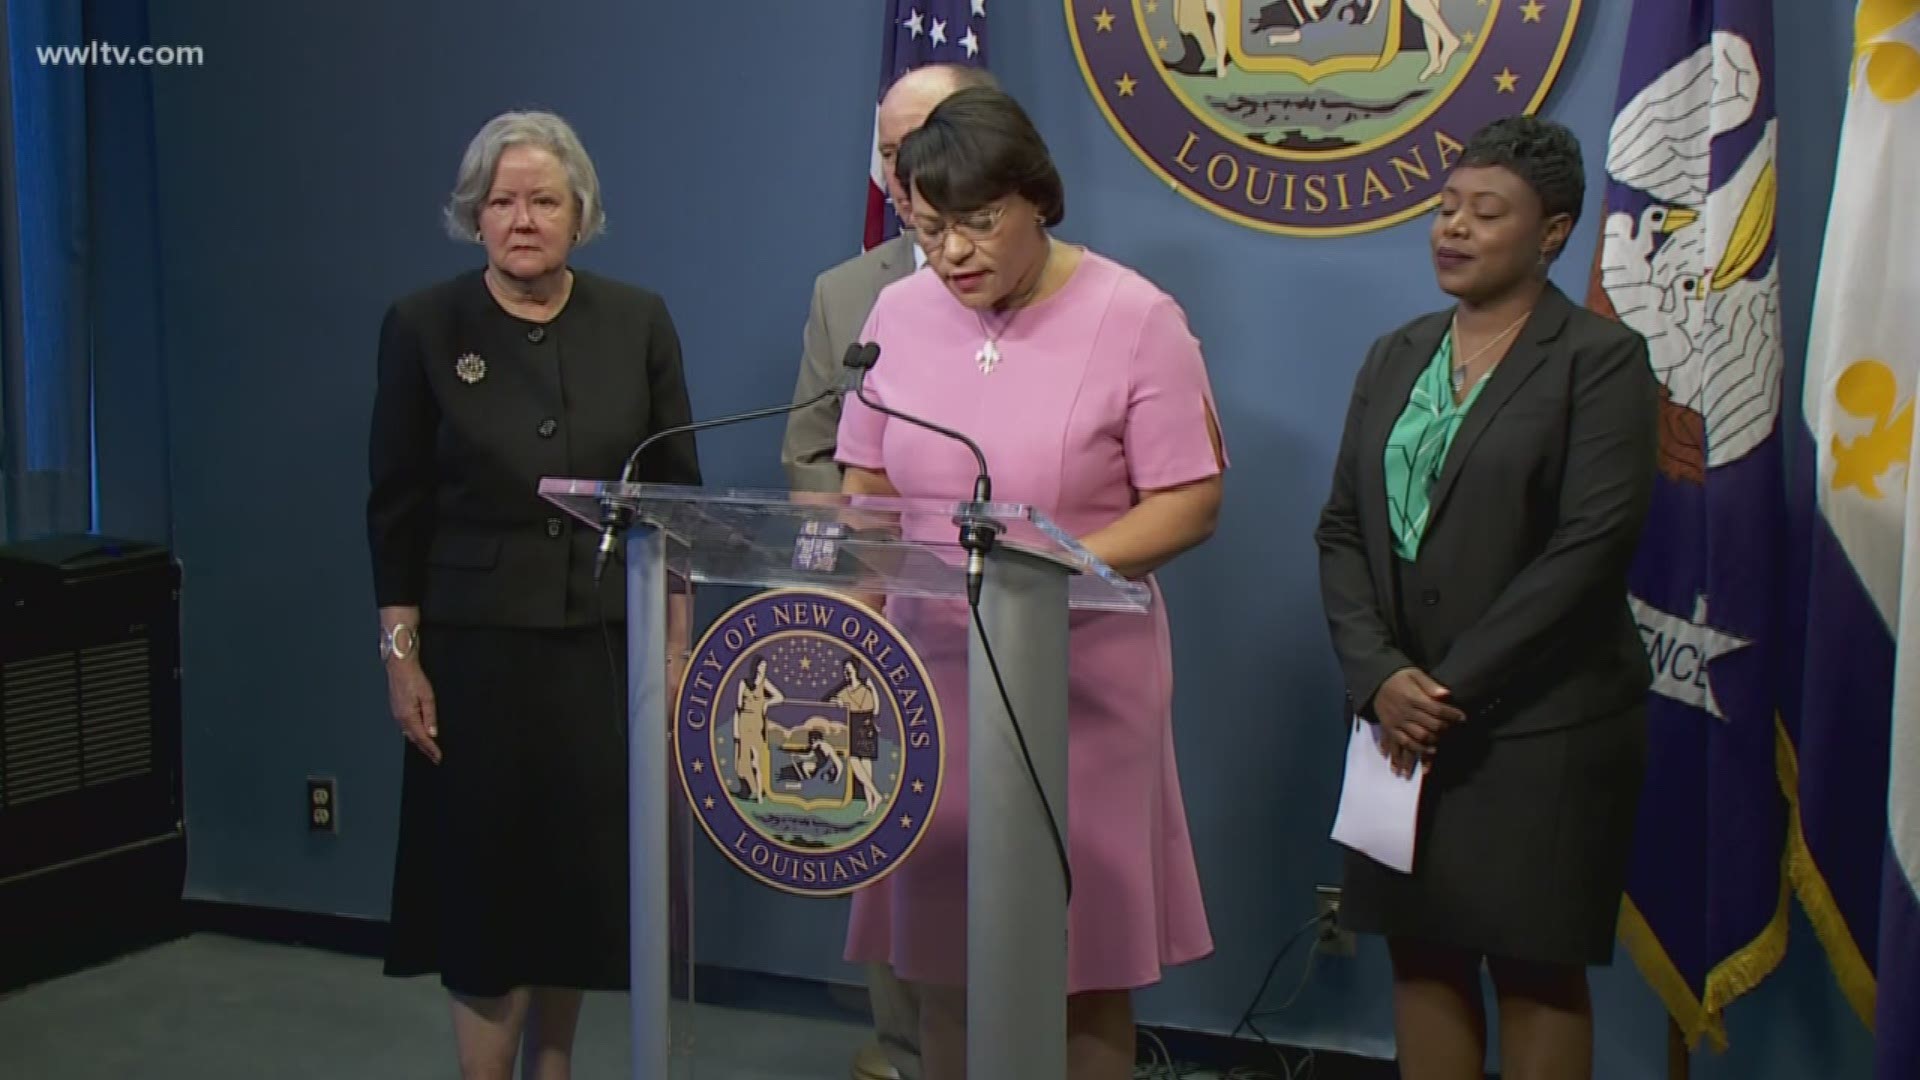 Mayor LaToya Cantrell on Monday announced a major shakeup at the top the Sewerage & Water Board just days before the beleaguered agency's new leader takes over.